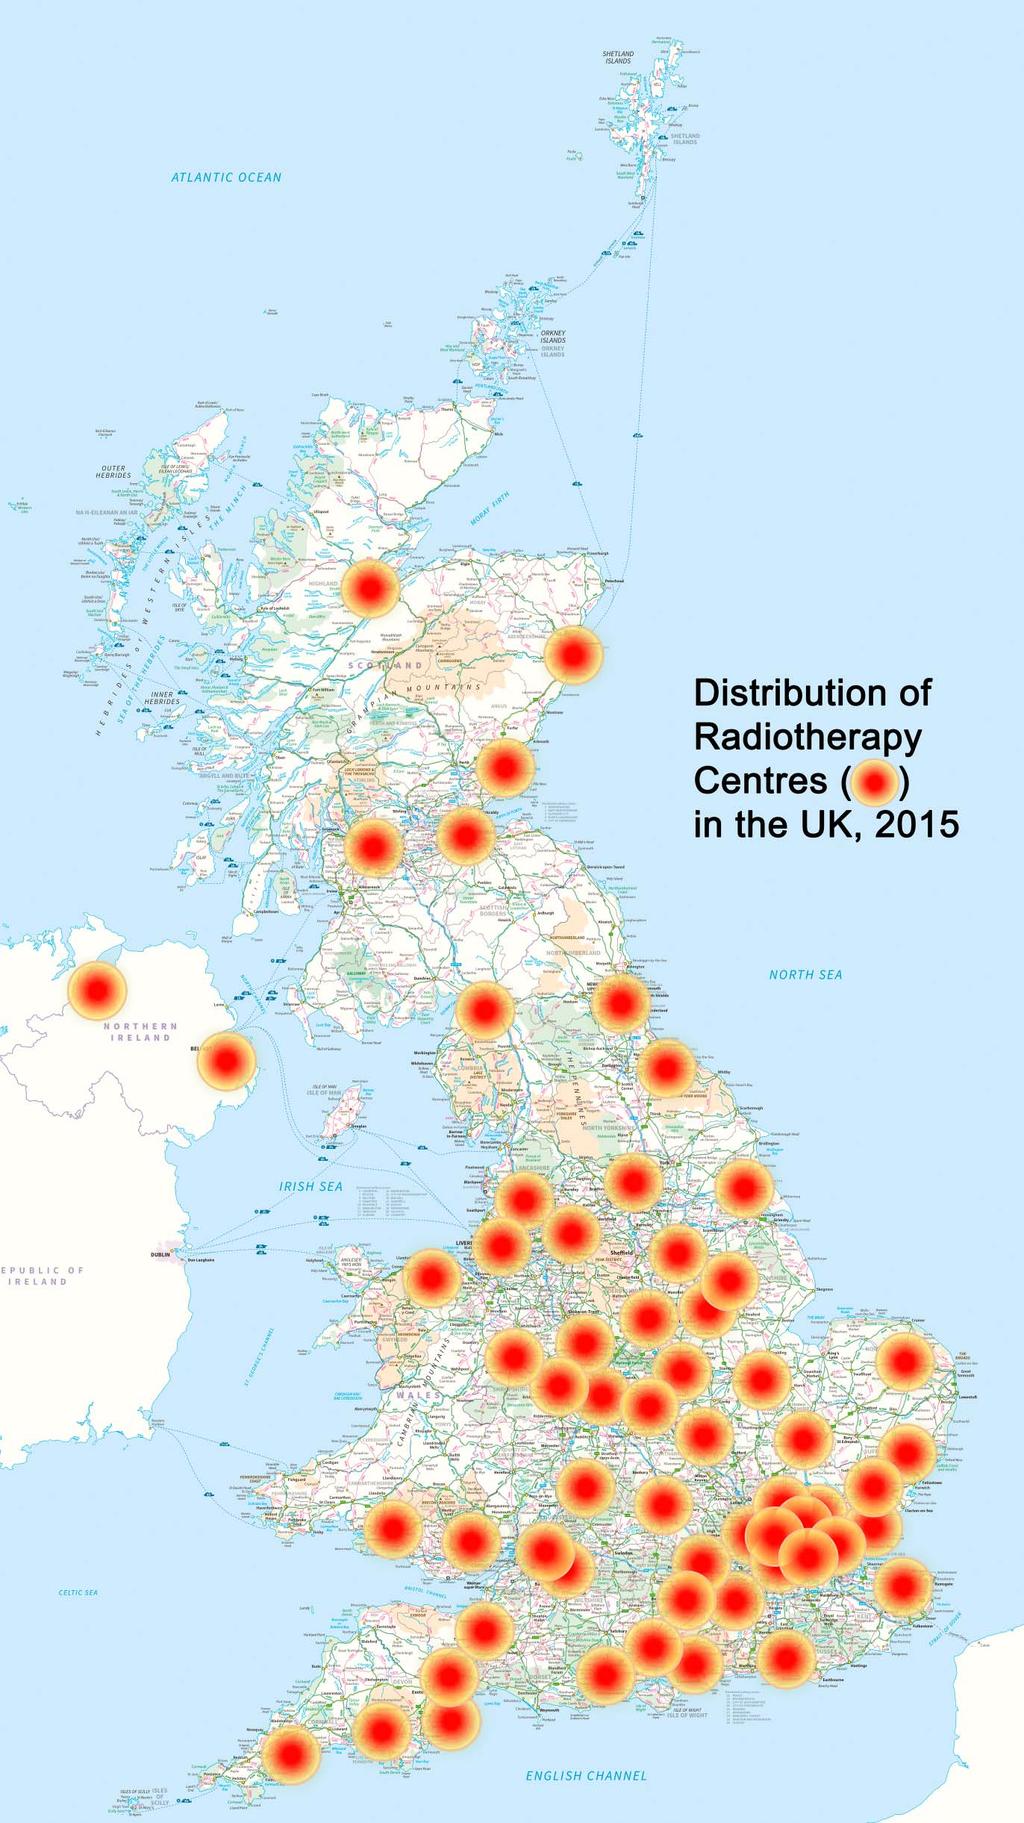 Figure 1 Map of the UK showing the locations of radiotherapy centres with a radius of 13 miles (20 km) drawn around them.